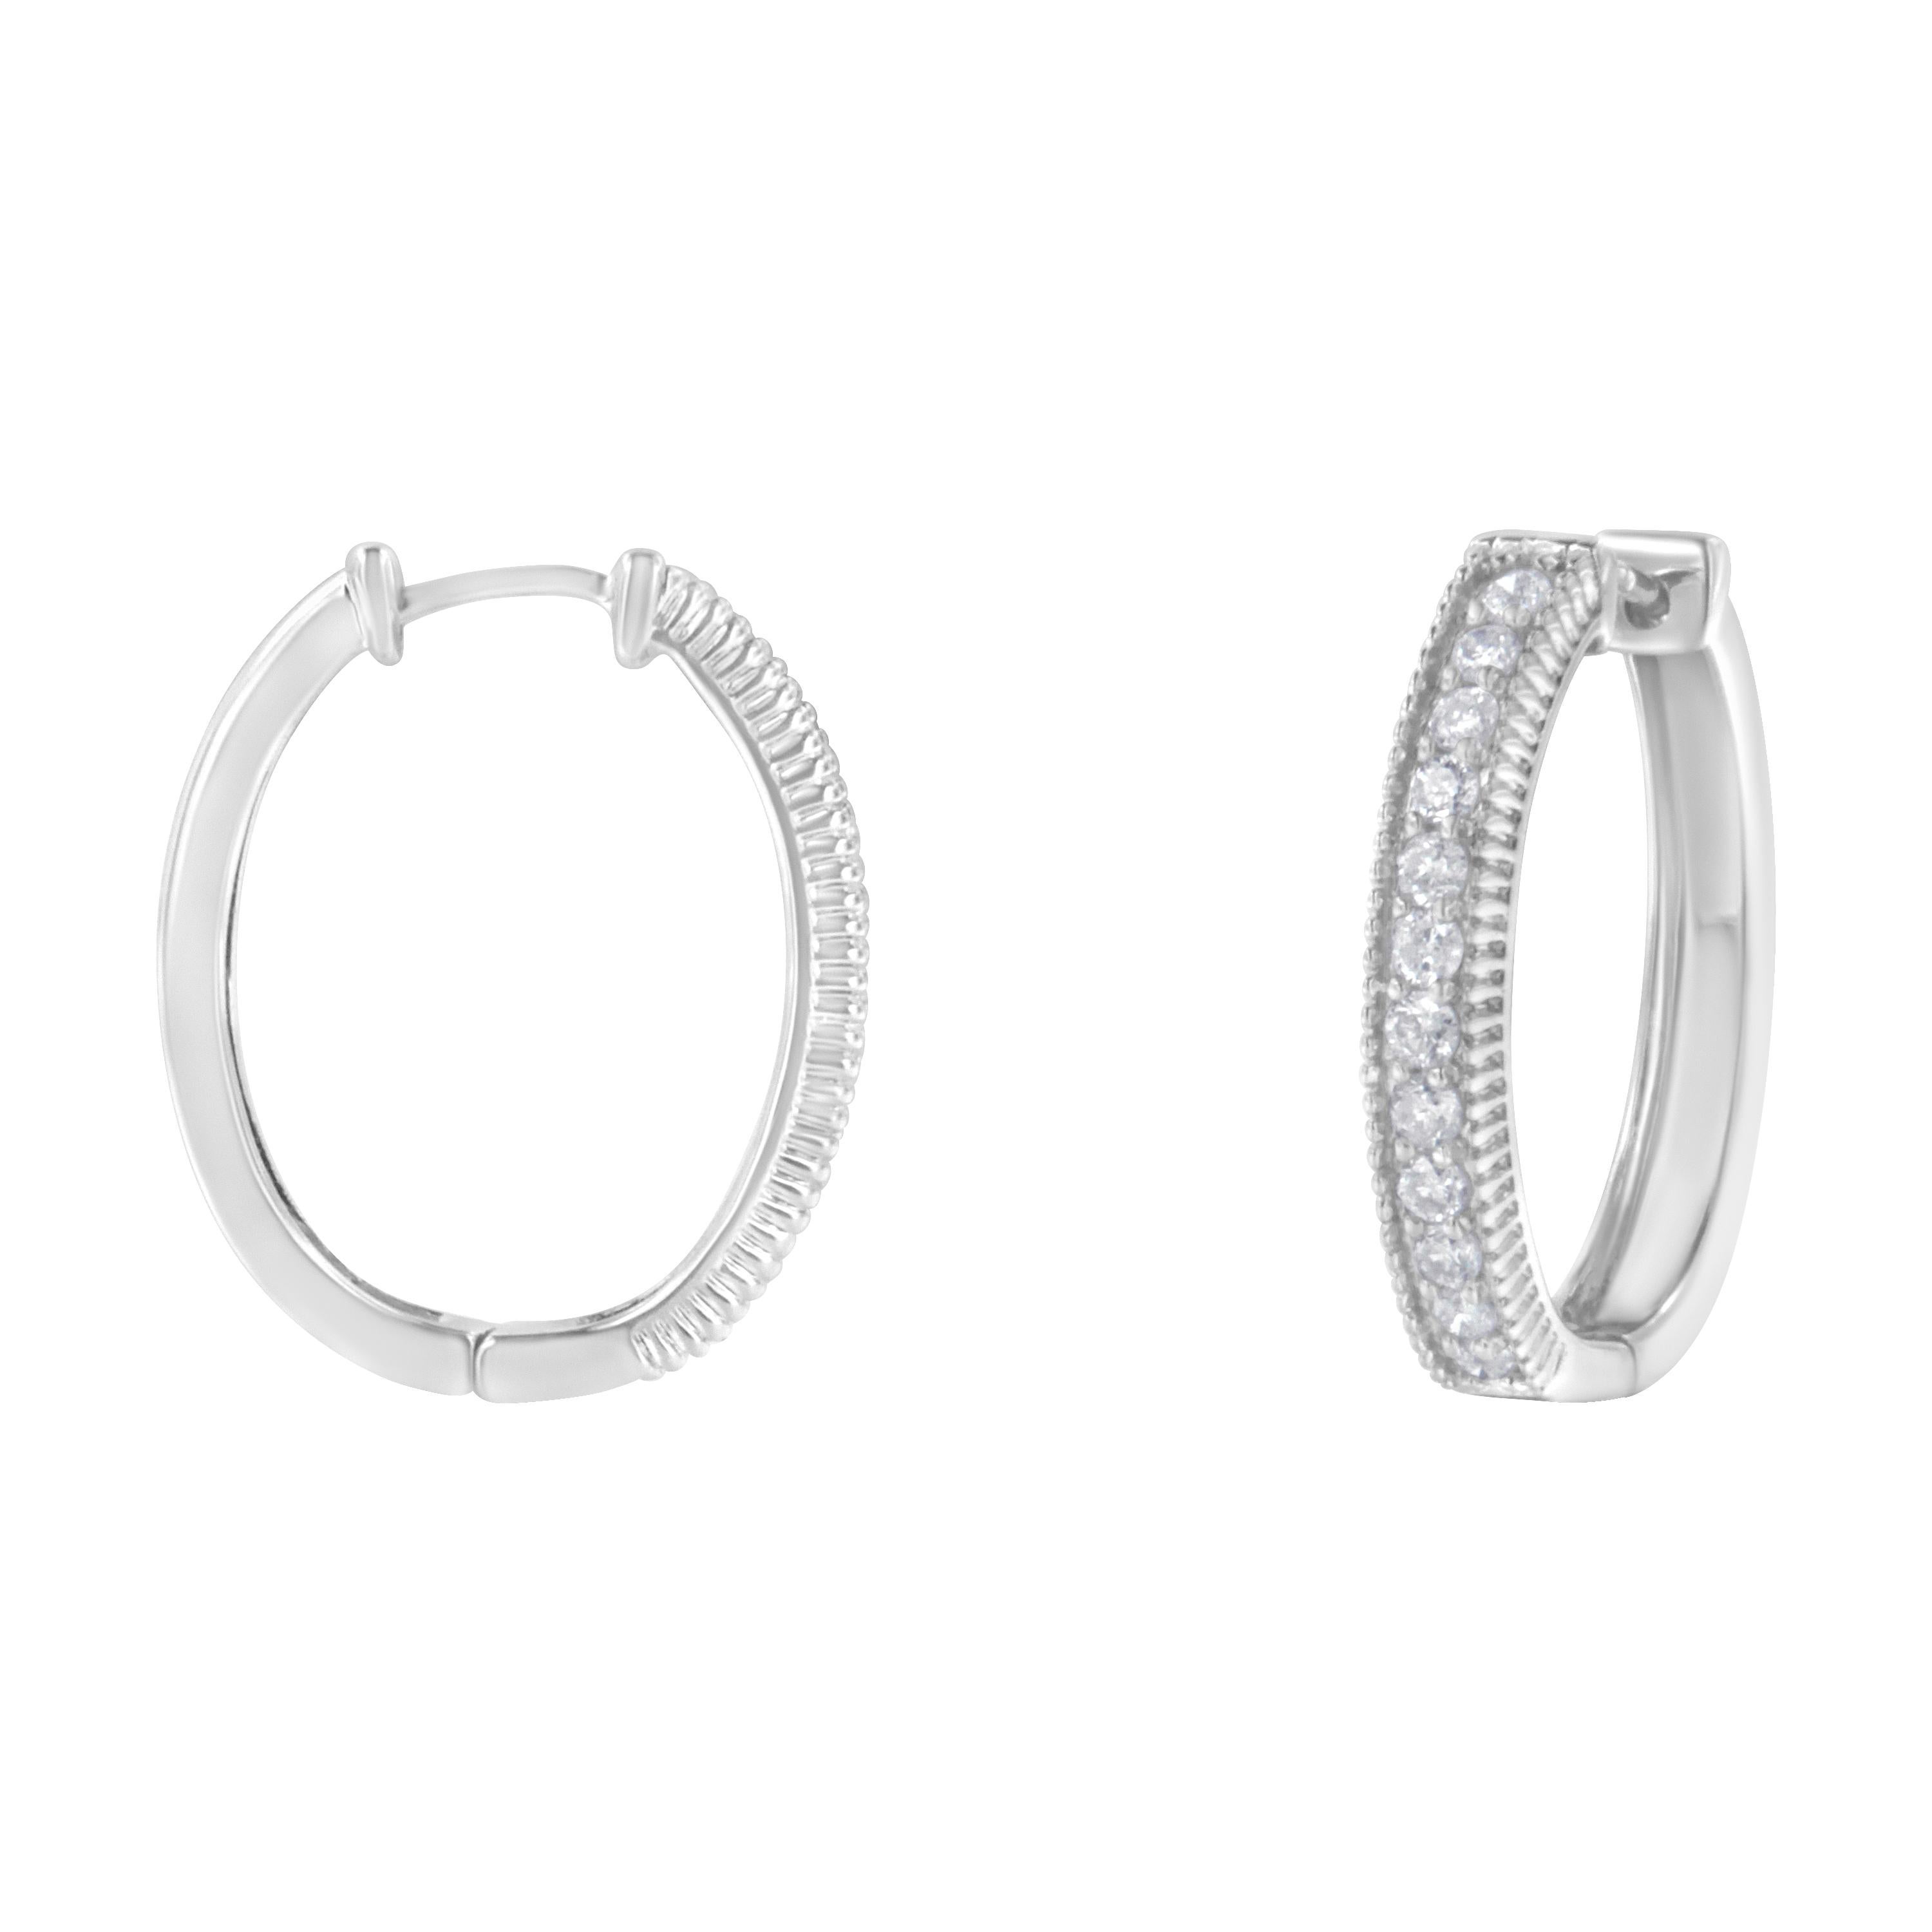 A pair of modern diamond hoop earrings that feature a row of round diamonds. Crafted in 10 karat white gold, they have a total diamond weight of 1 carat. These natural diamonds are color rated as H-I Color, and clarity graded as I1-I2 Clarity. The